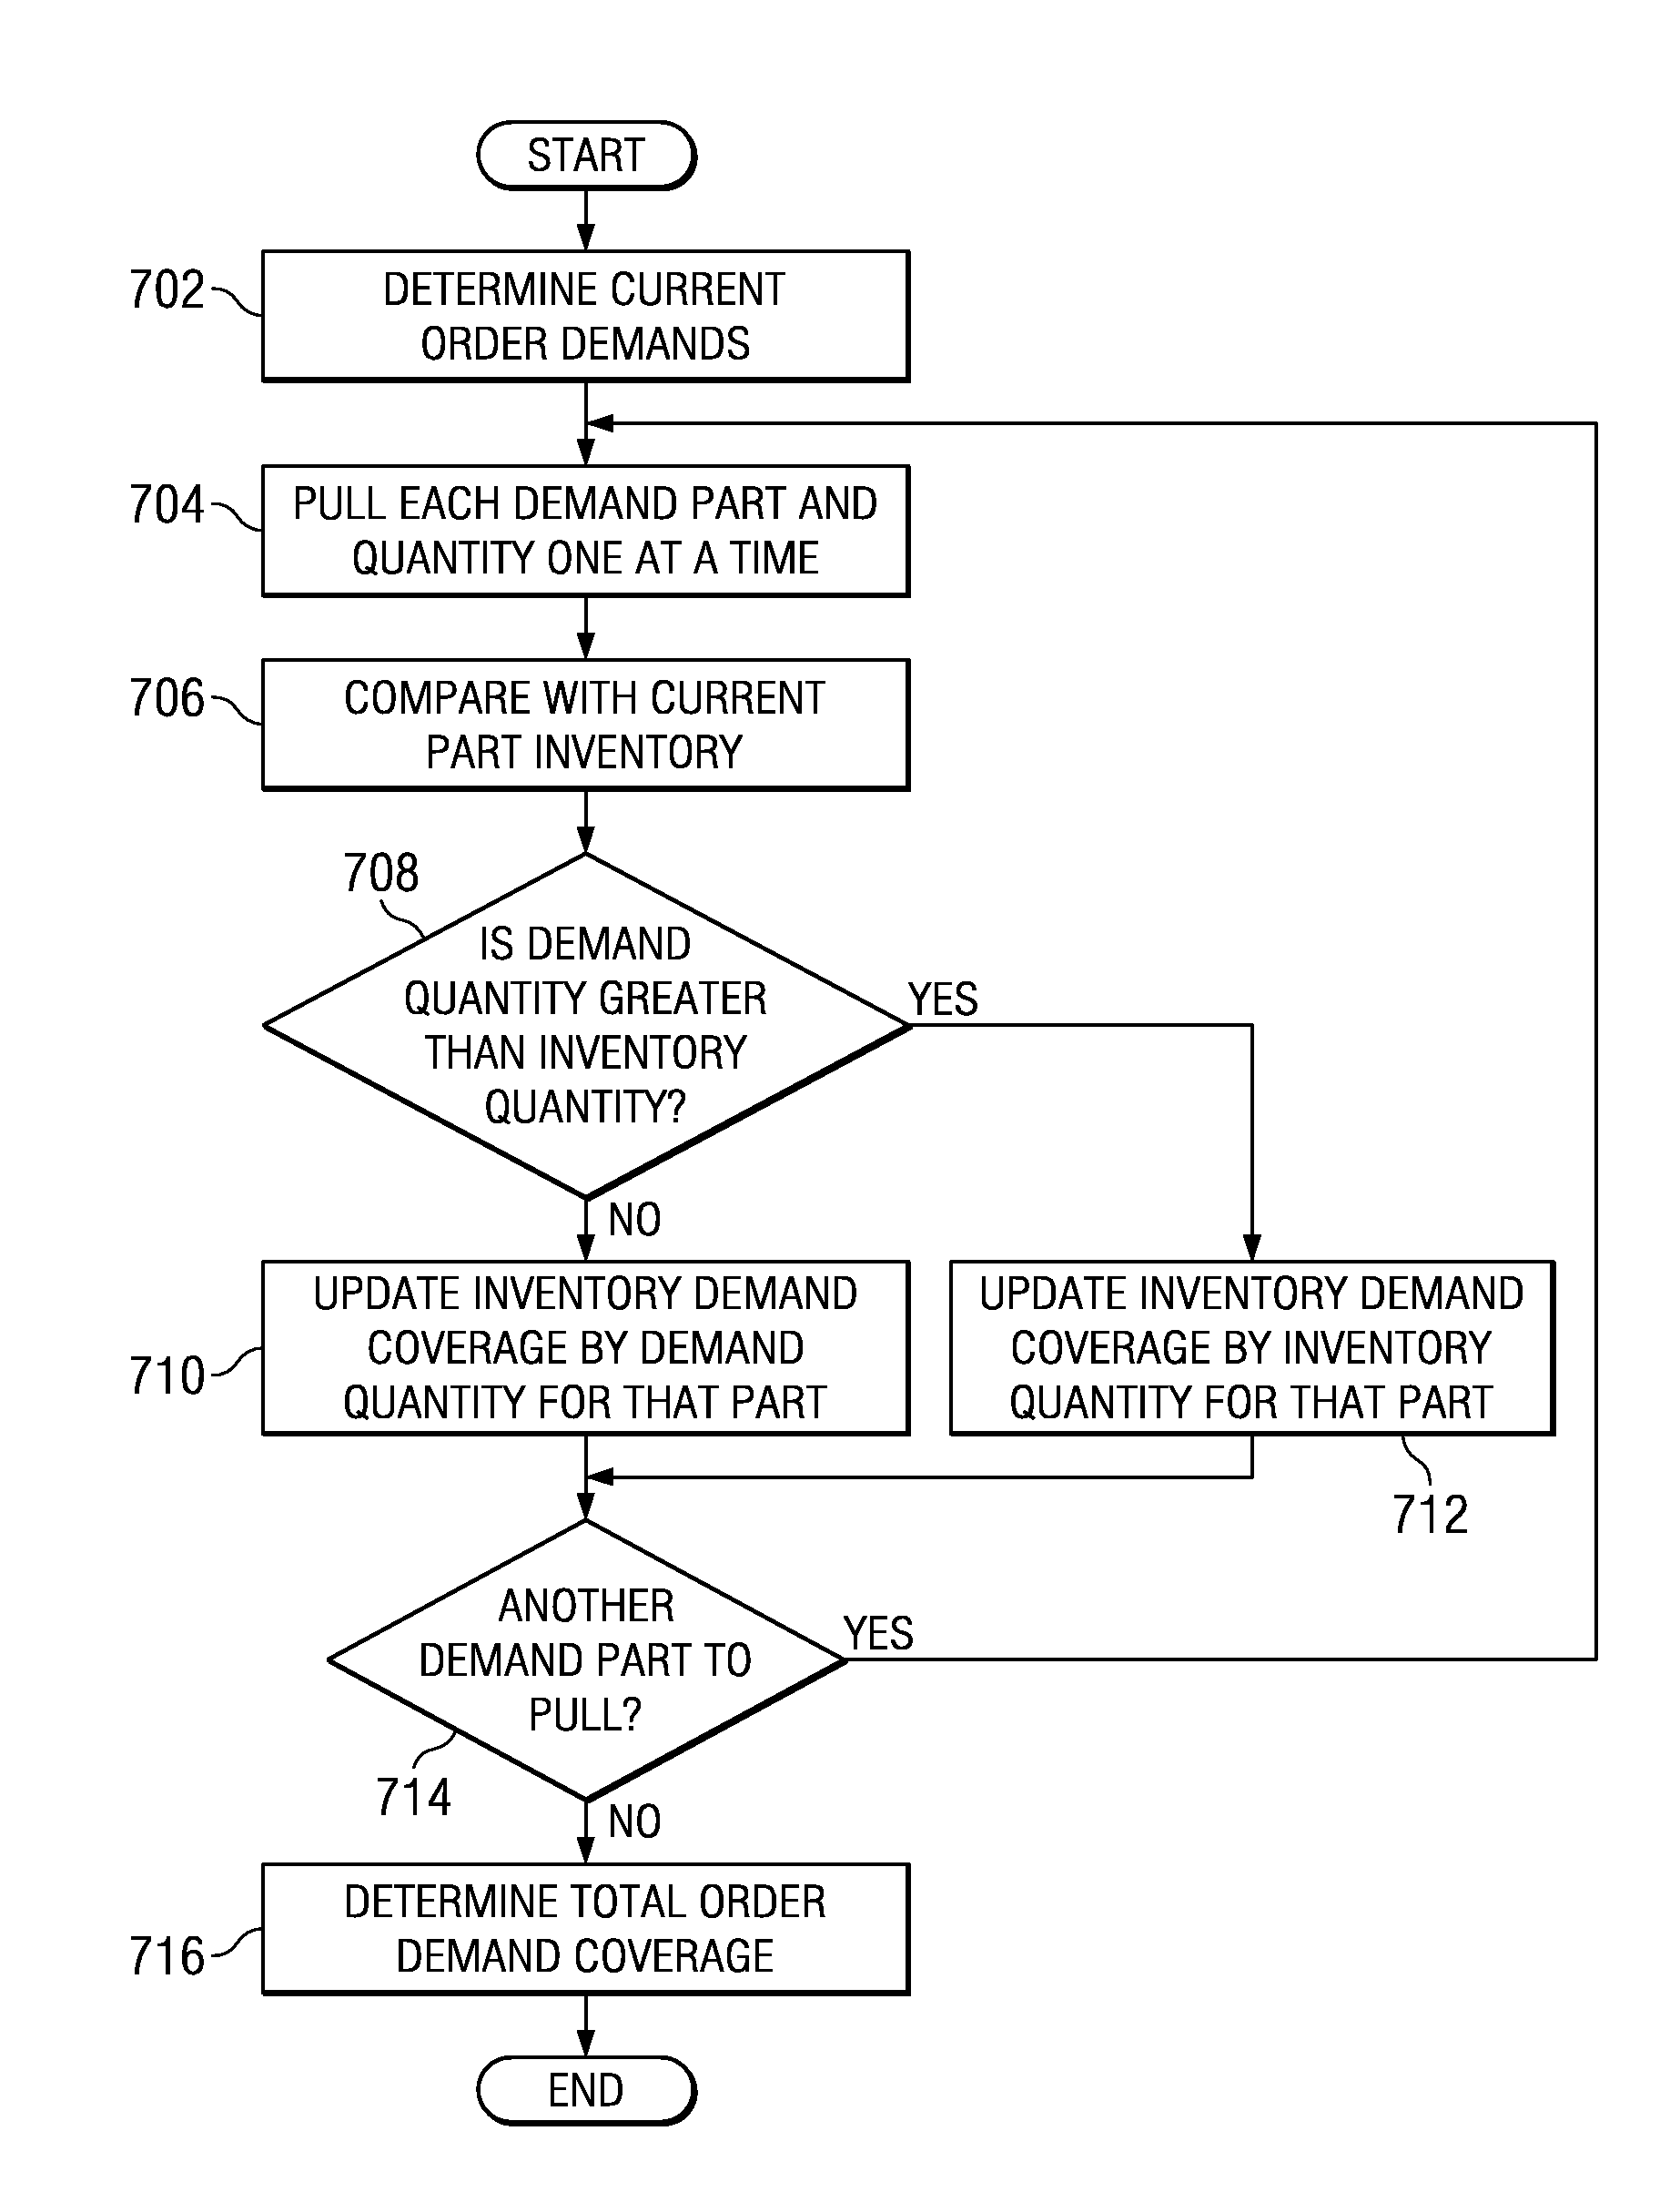 Method and System for Automatically Adjusting Inventory Based on Loaner Parts and Order Demands